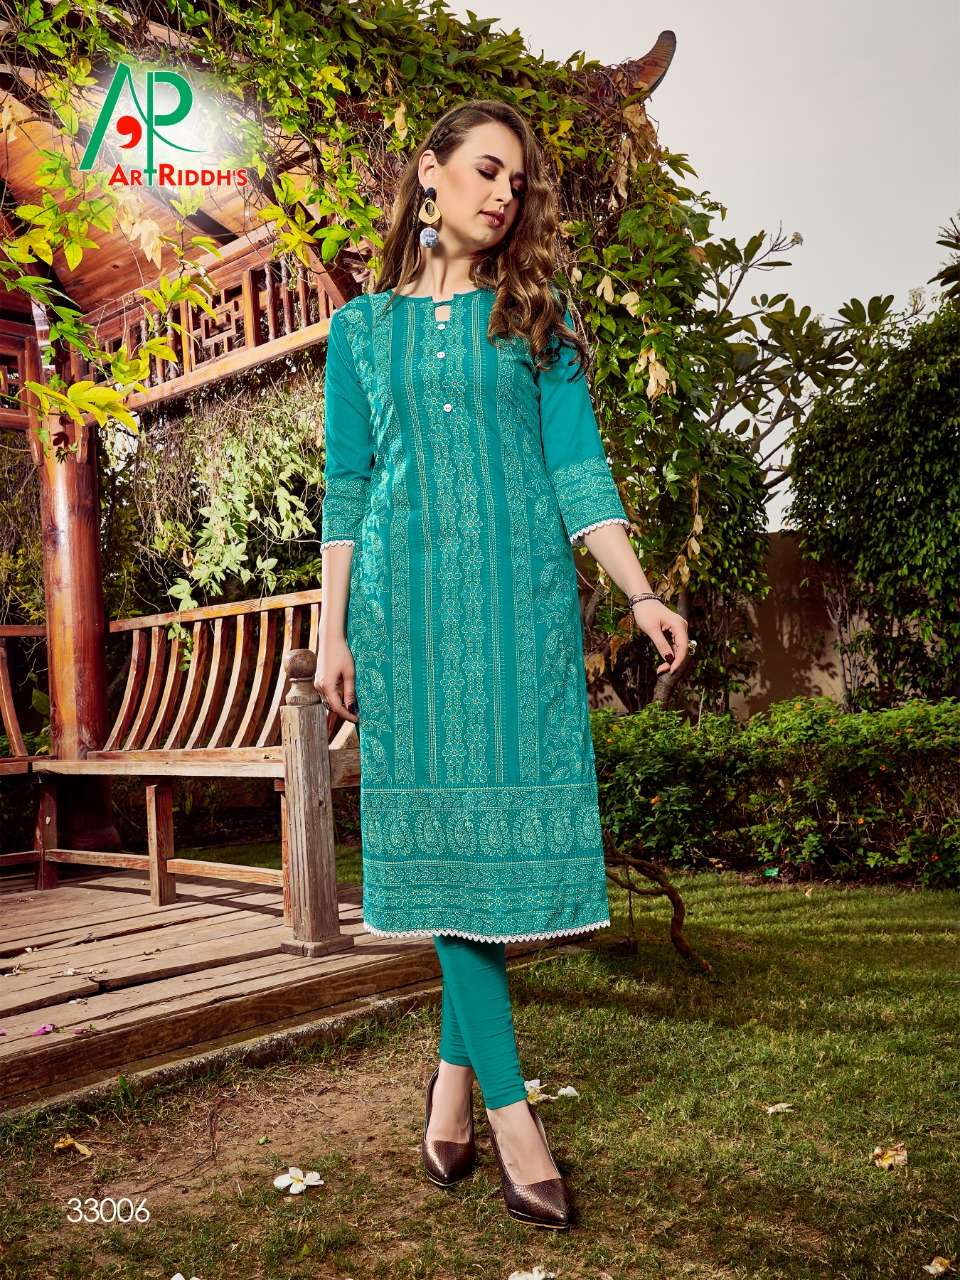 MALL CULTURE BY ART RIDDHS 33001 TO 33006 SERIES STYLISH FANCY BEAUTIFUL COLORFUL CASUAL WEAR & ETHNIC WEAR RAYON SLUB PRINTED KURTIS AT WHOLESALE PRICE